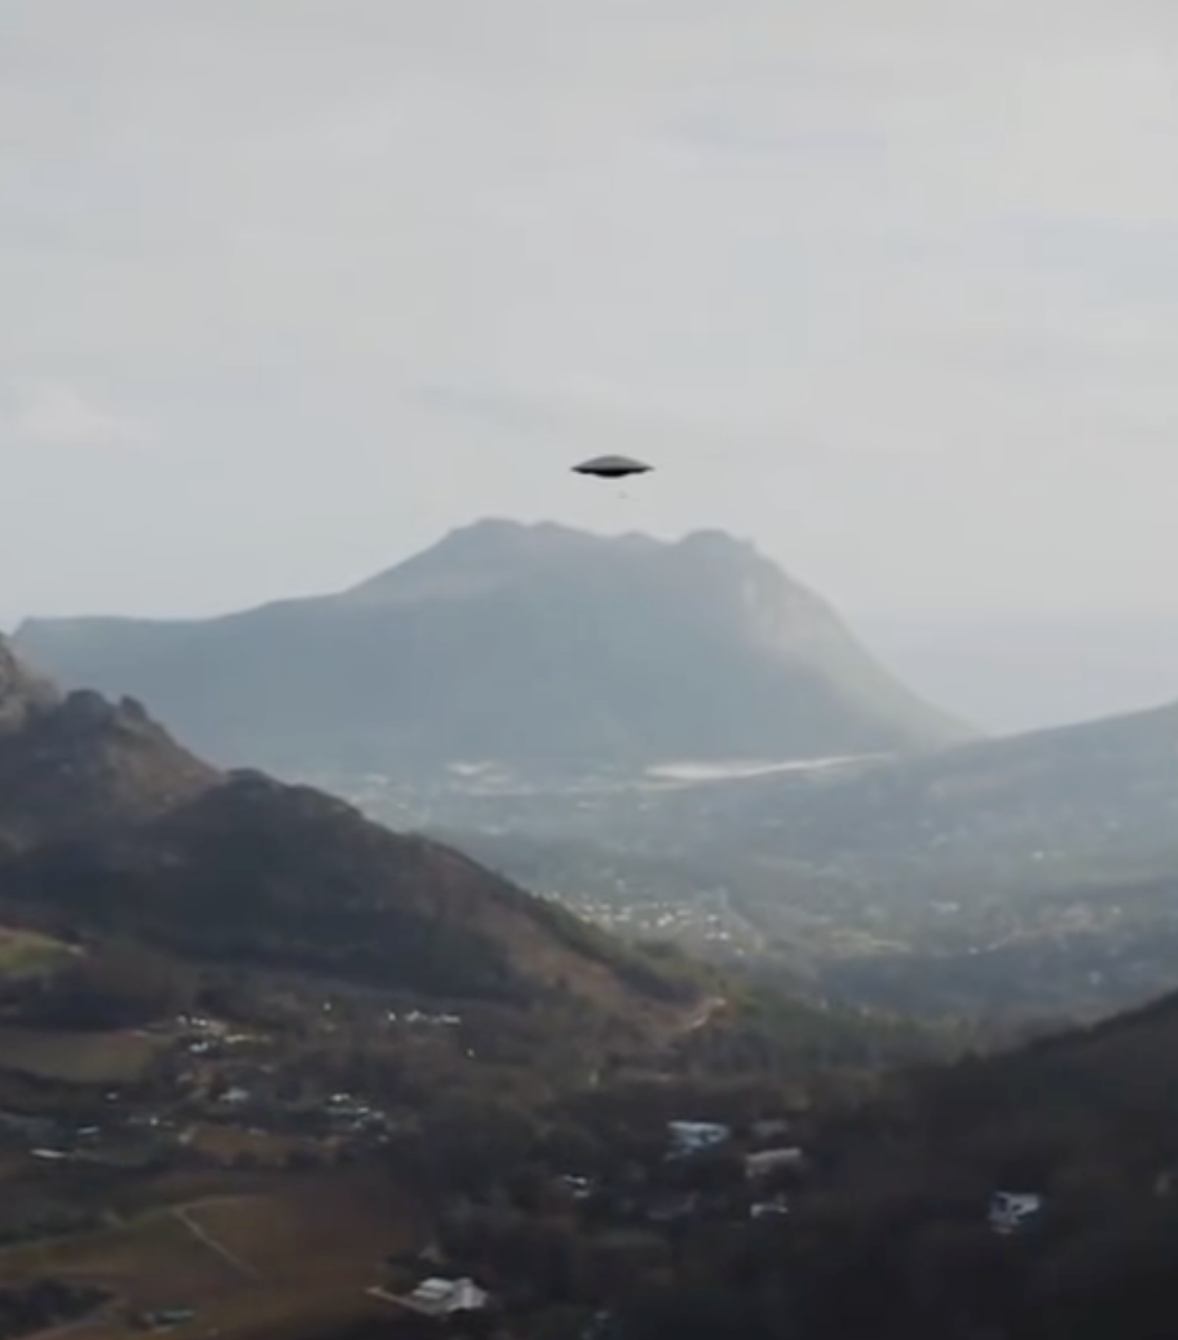 People discovered the appearance of a UFO in the distance on a mountain in America. ‎